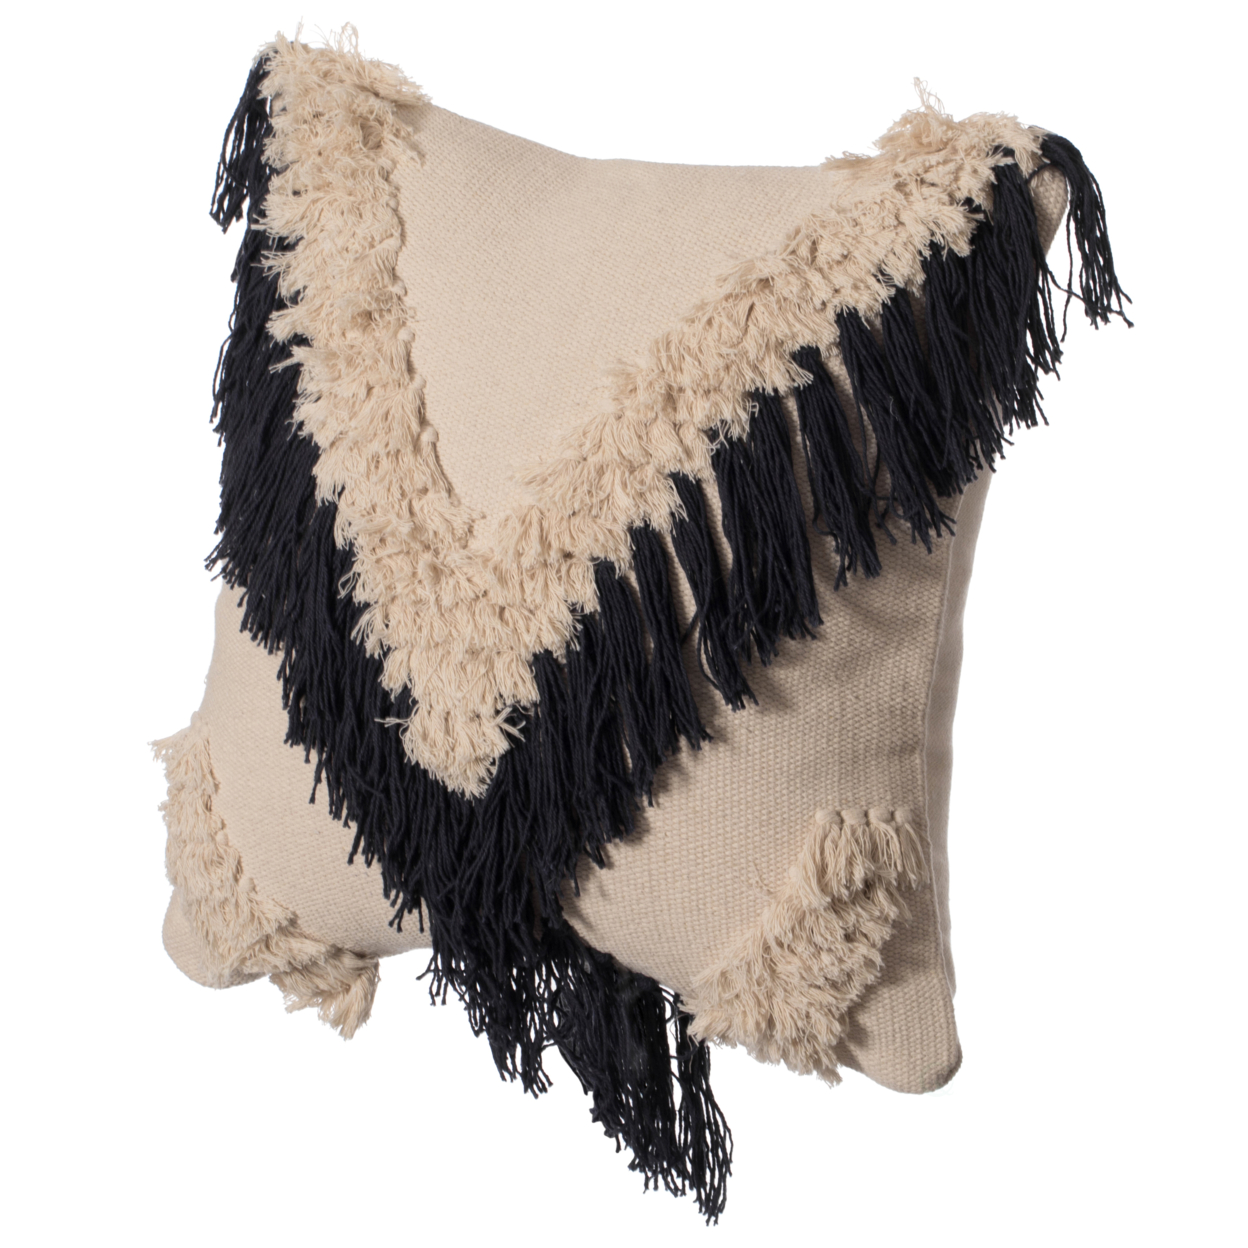 16 Handwoven Cotton Throw Pillow Cover With Embossed And Fringed Crossed Line - Charcoal With Cushion